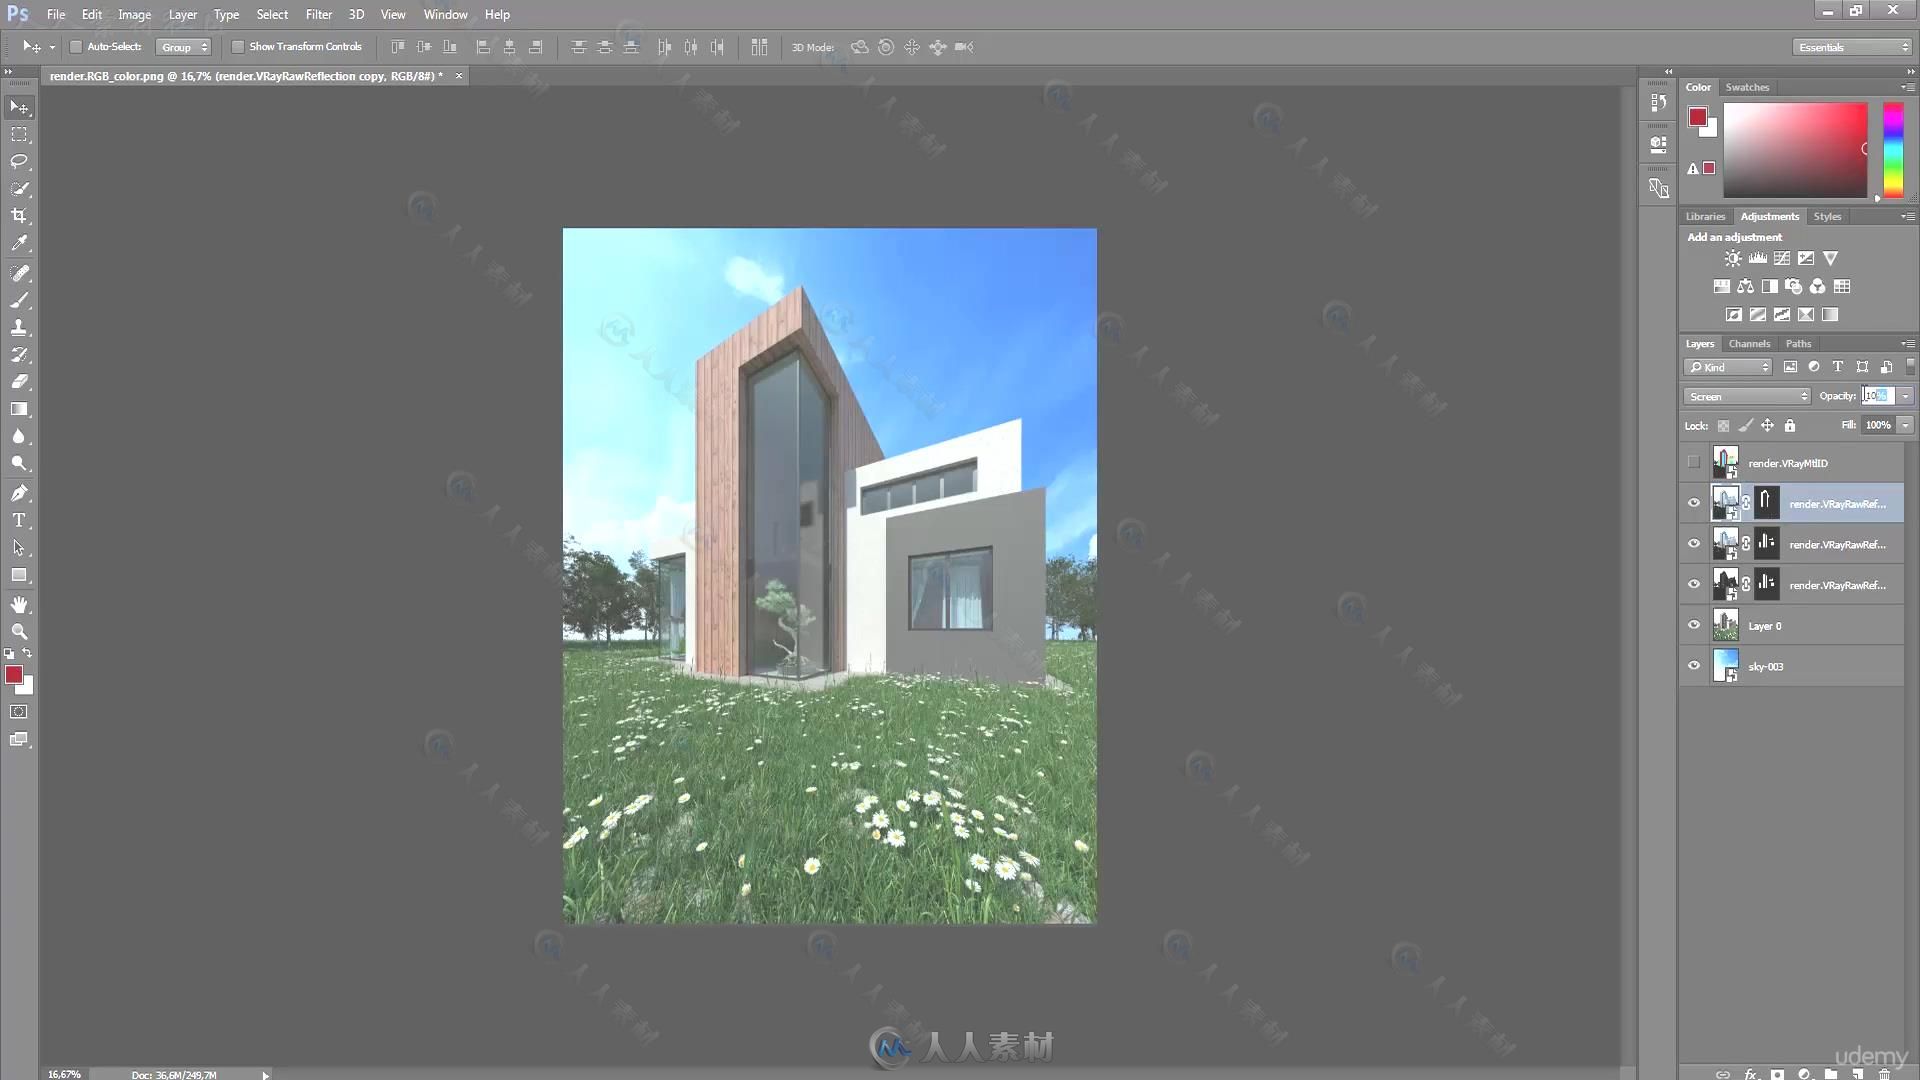 3dsmax林中房屋建筑可视化视频教程 Udemy Learn 3ds max and vray Making of House...